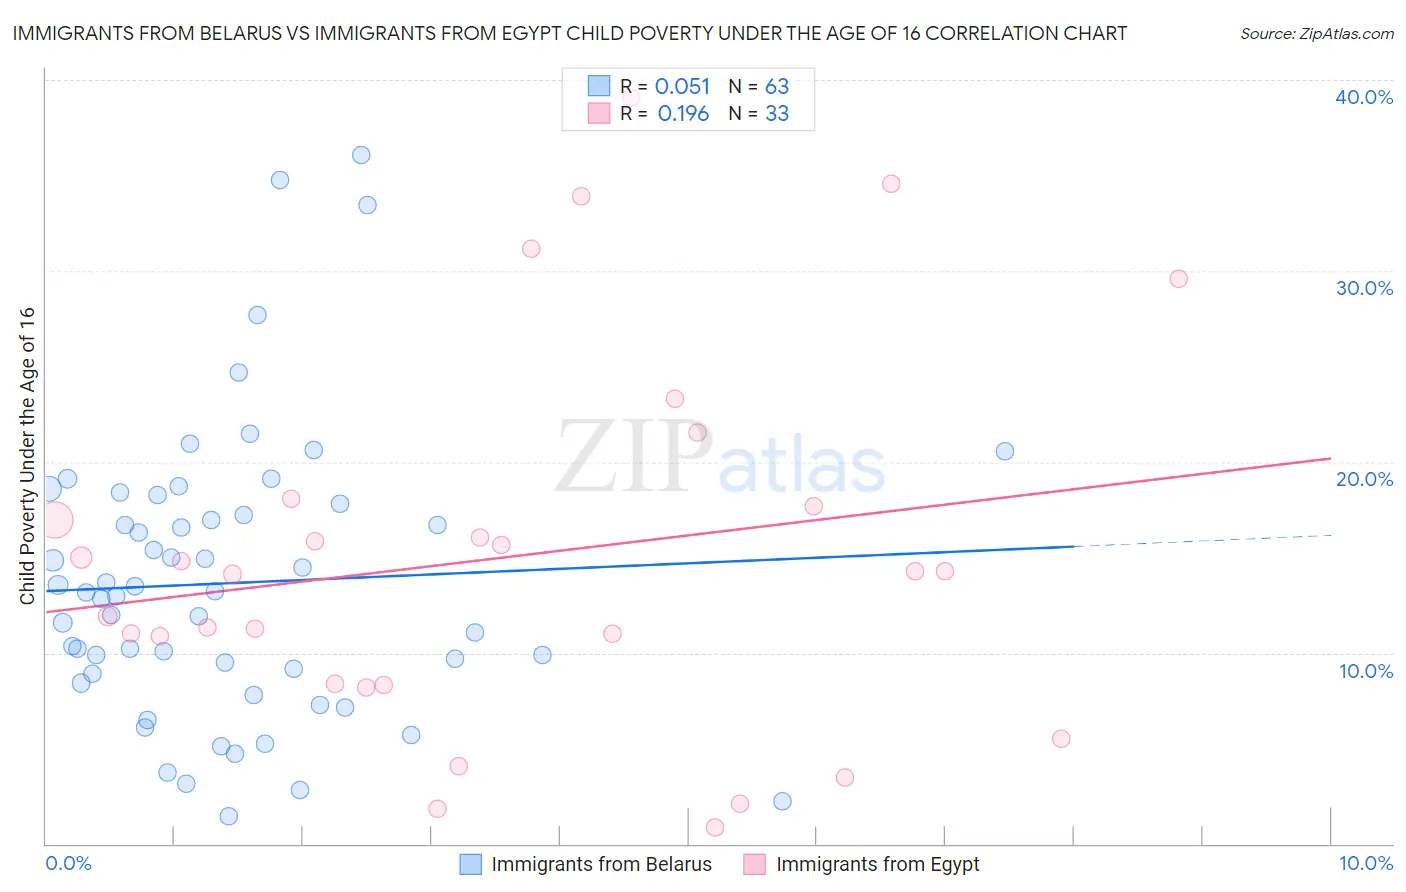 Immigrants from Belarus vs Immigrants from Egypt Child Poverty Under the Age of 16